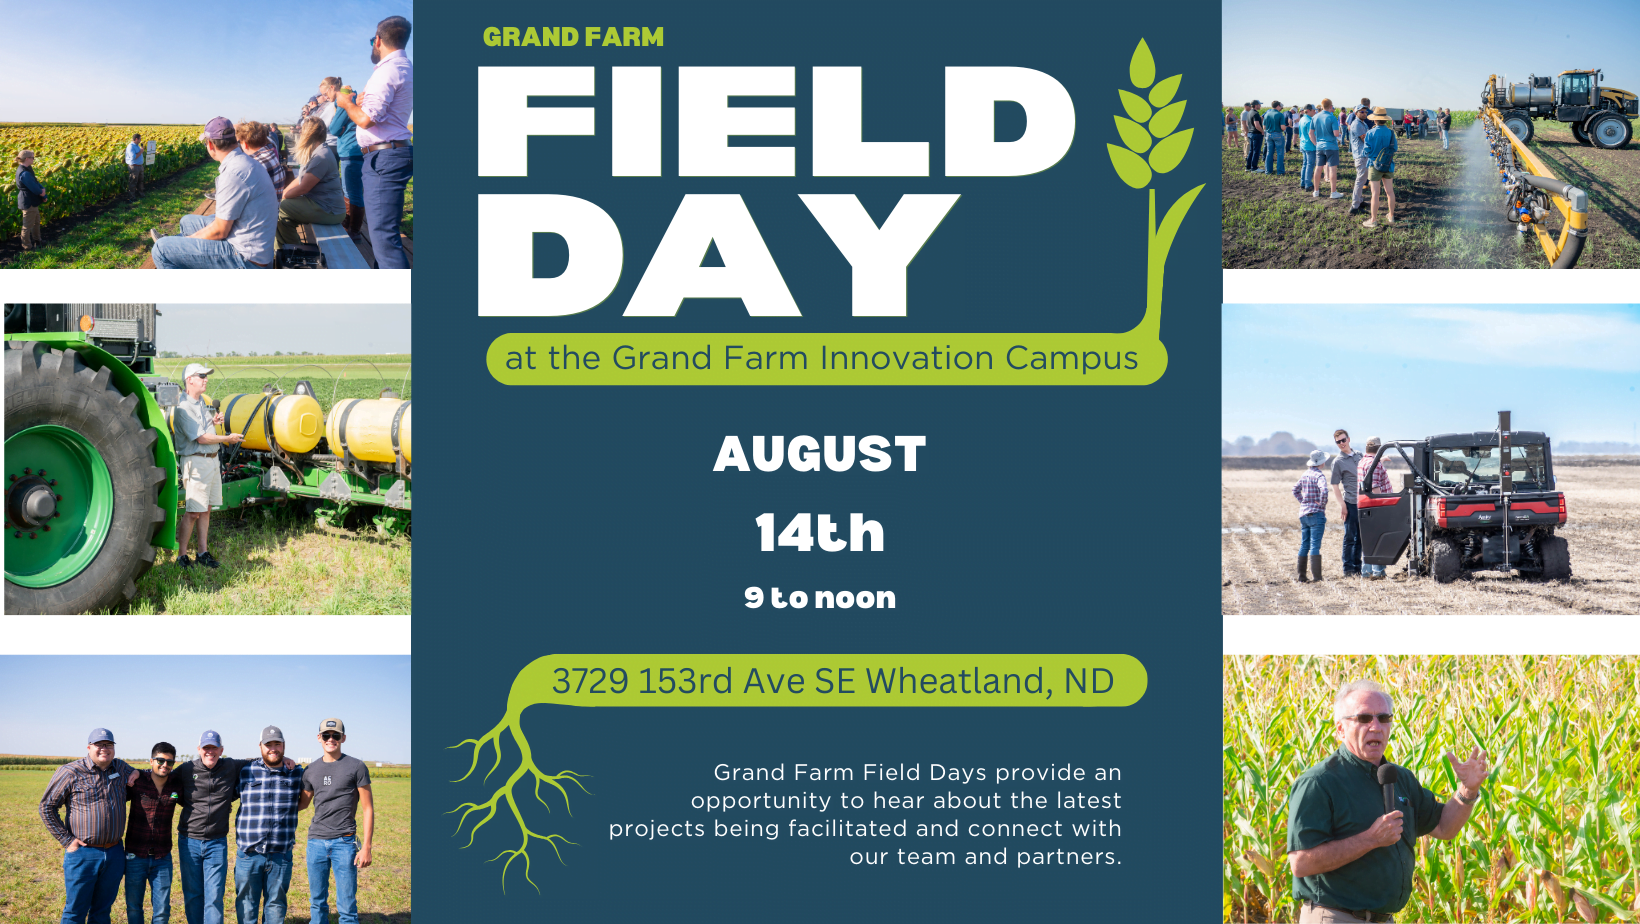 Field Day at the Grand Farm Innovation Campus on August 14th.